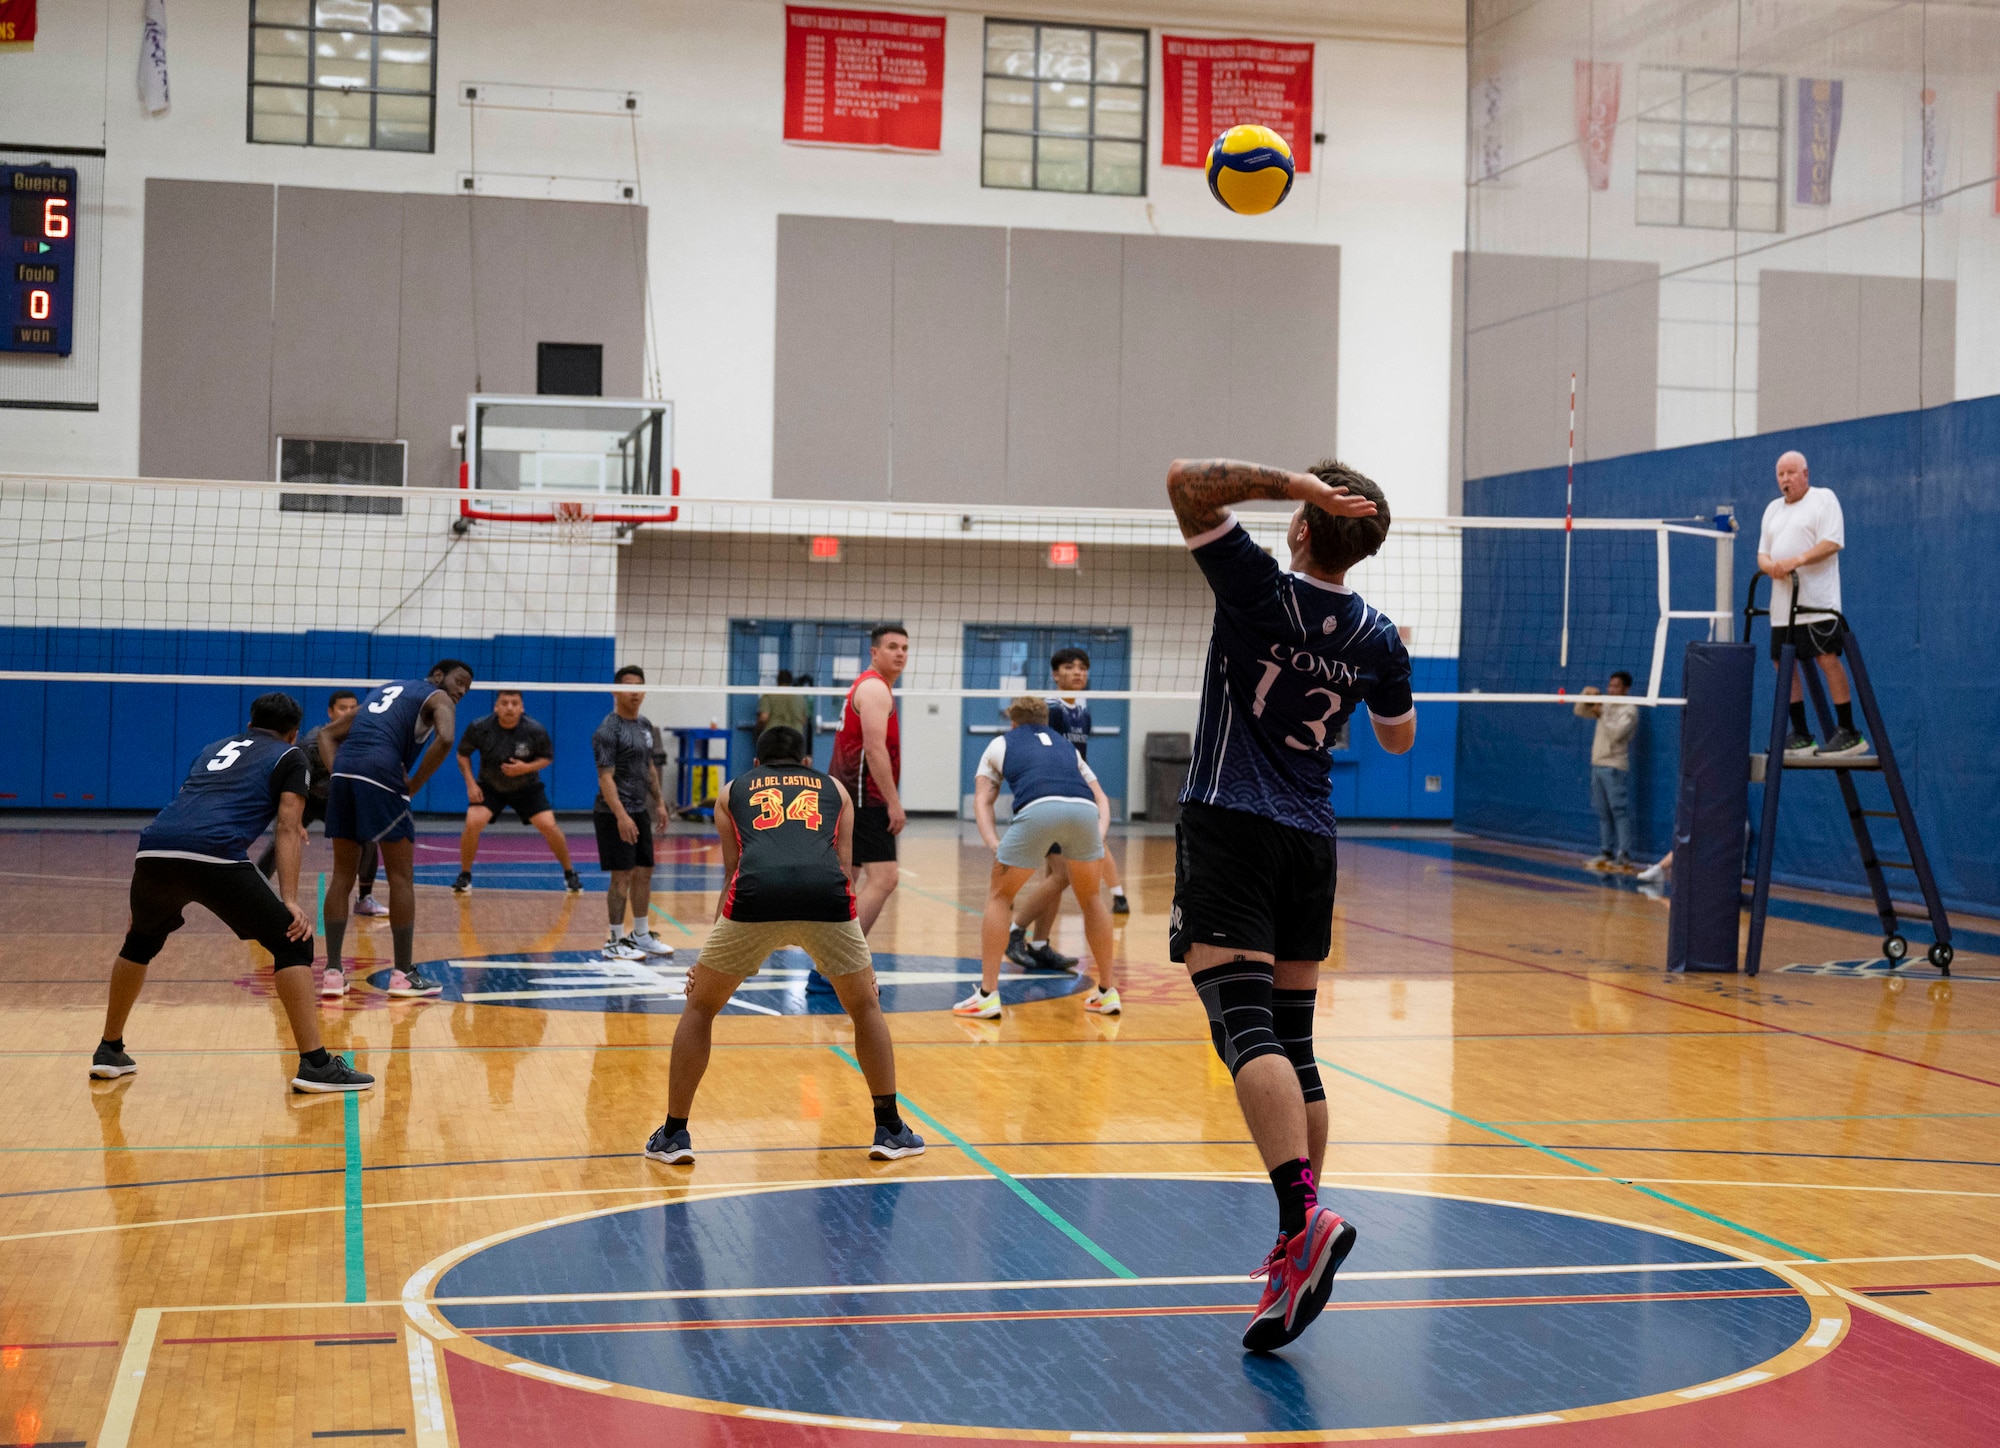 U.S. Air Force Senior Airman Archie Conn, a member of the Civil Engineer Squadron’s intramural volleyball team, serves the ball during the championship game on Andersen Air Force Base, Guam, Oct. 26, 2023.  Andersen’s intramural volleyball league ended in a climactic final game between the Security Forces Squadron and CES. The game ended with SFS being named the champions. (U.S. Air Force photo by Airman 1st Class Spencer Perkins)